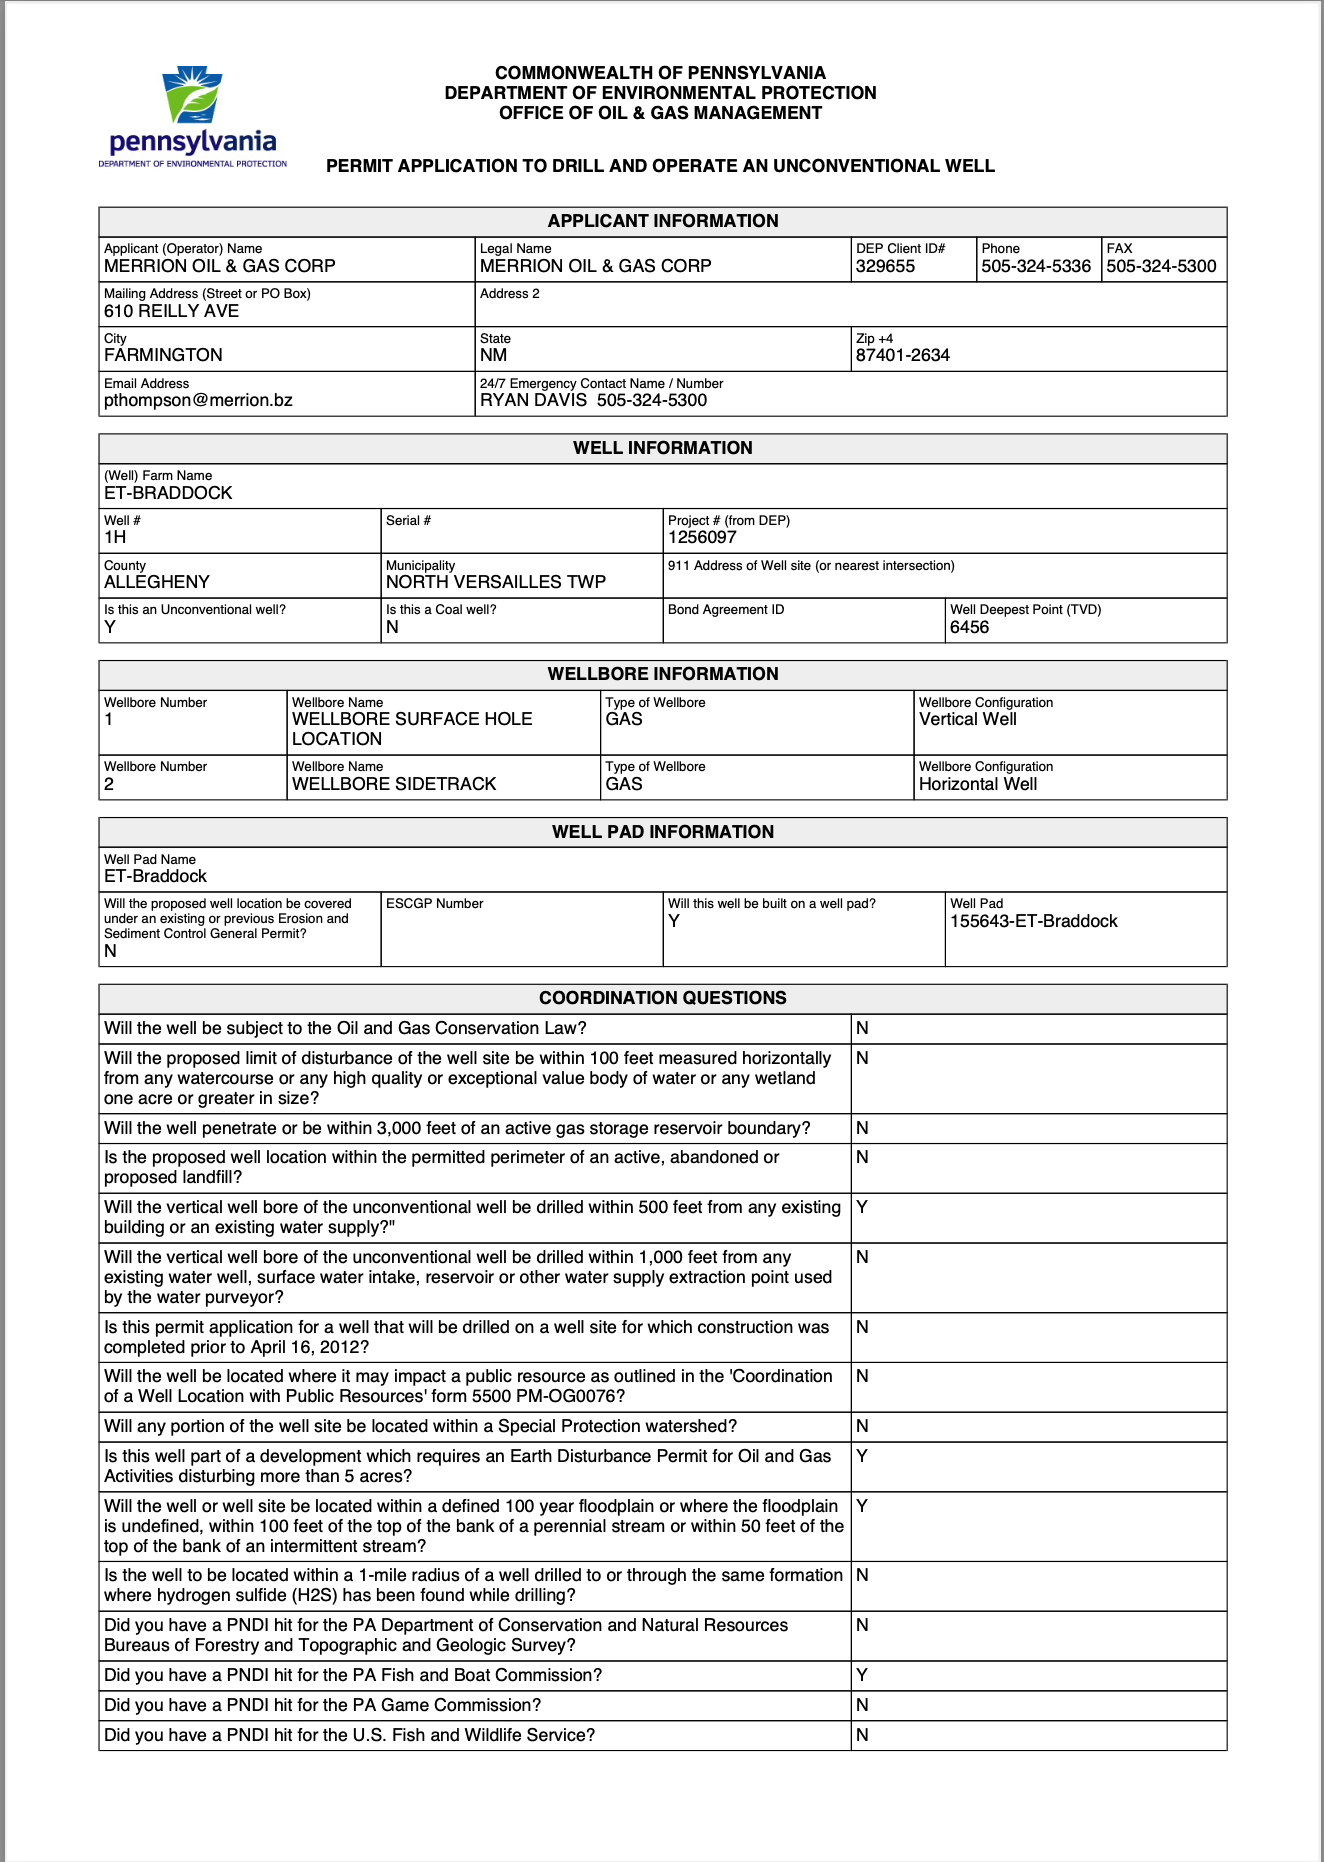 Permit Application to Drill and Operate Well